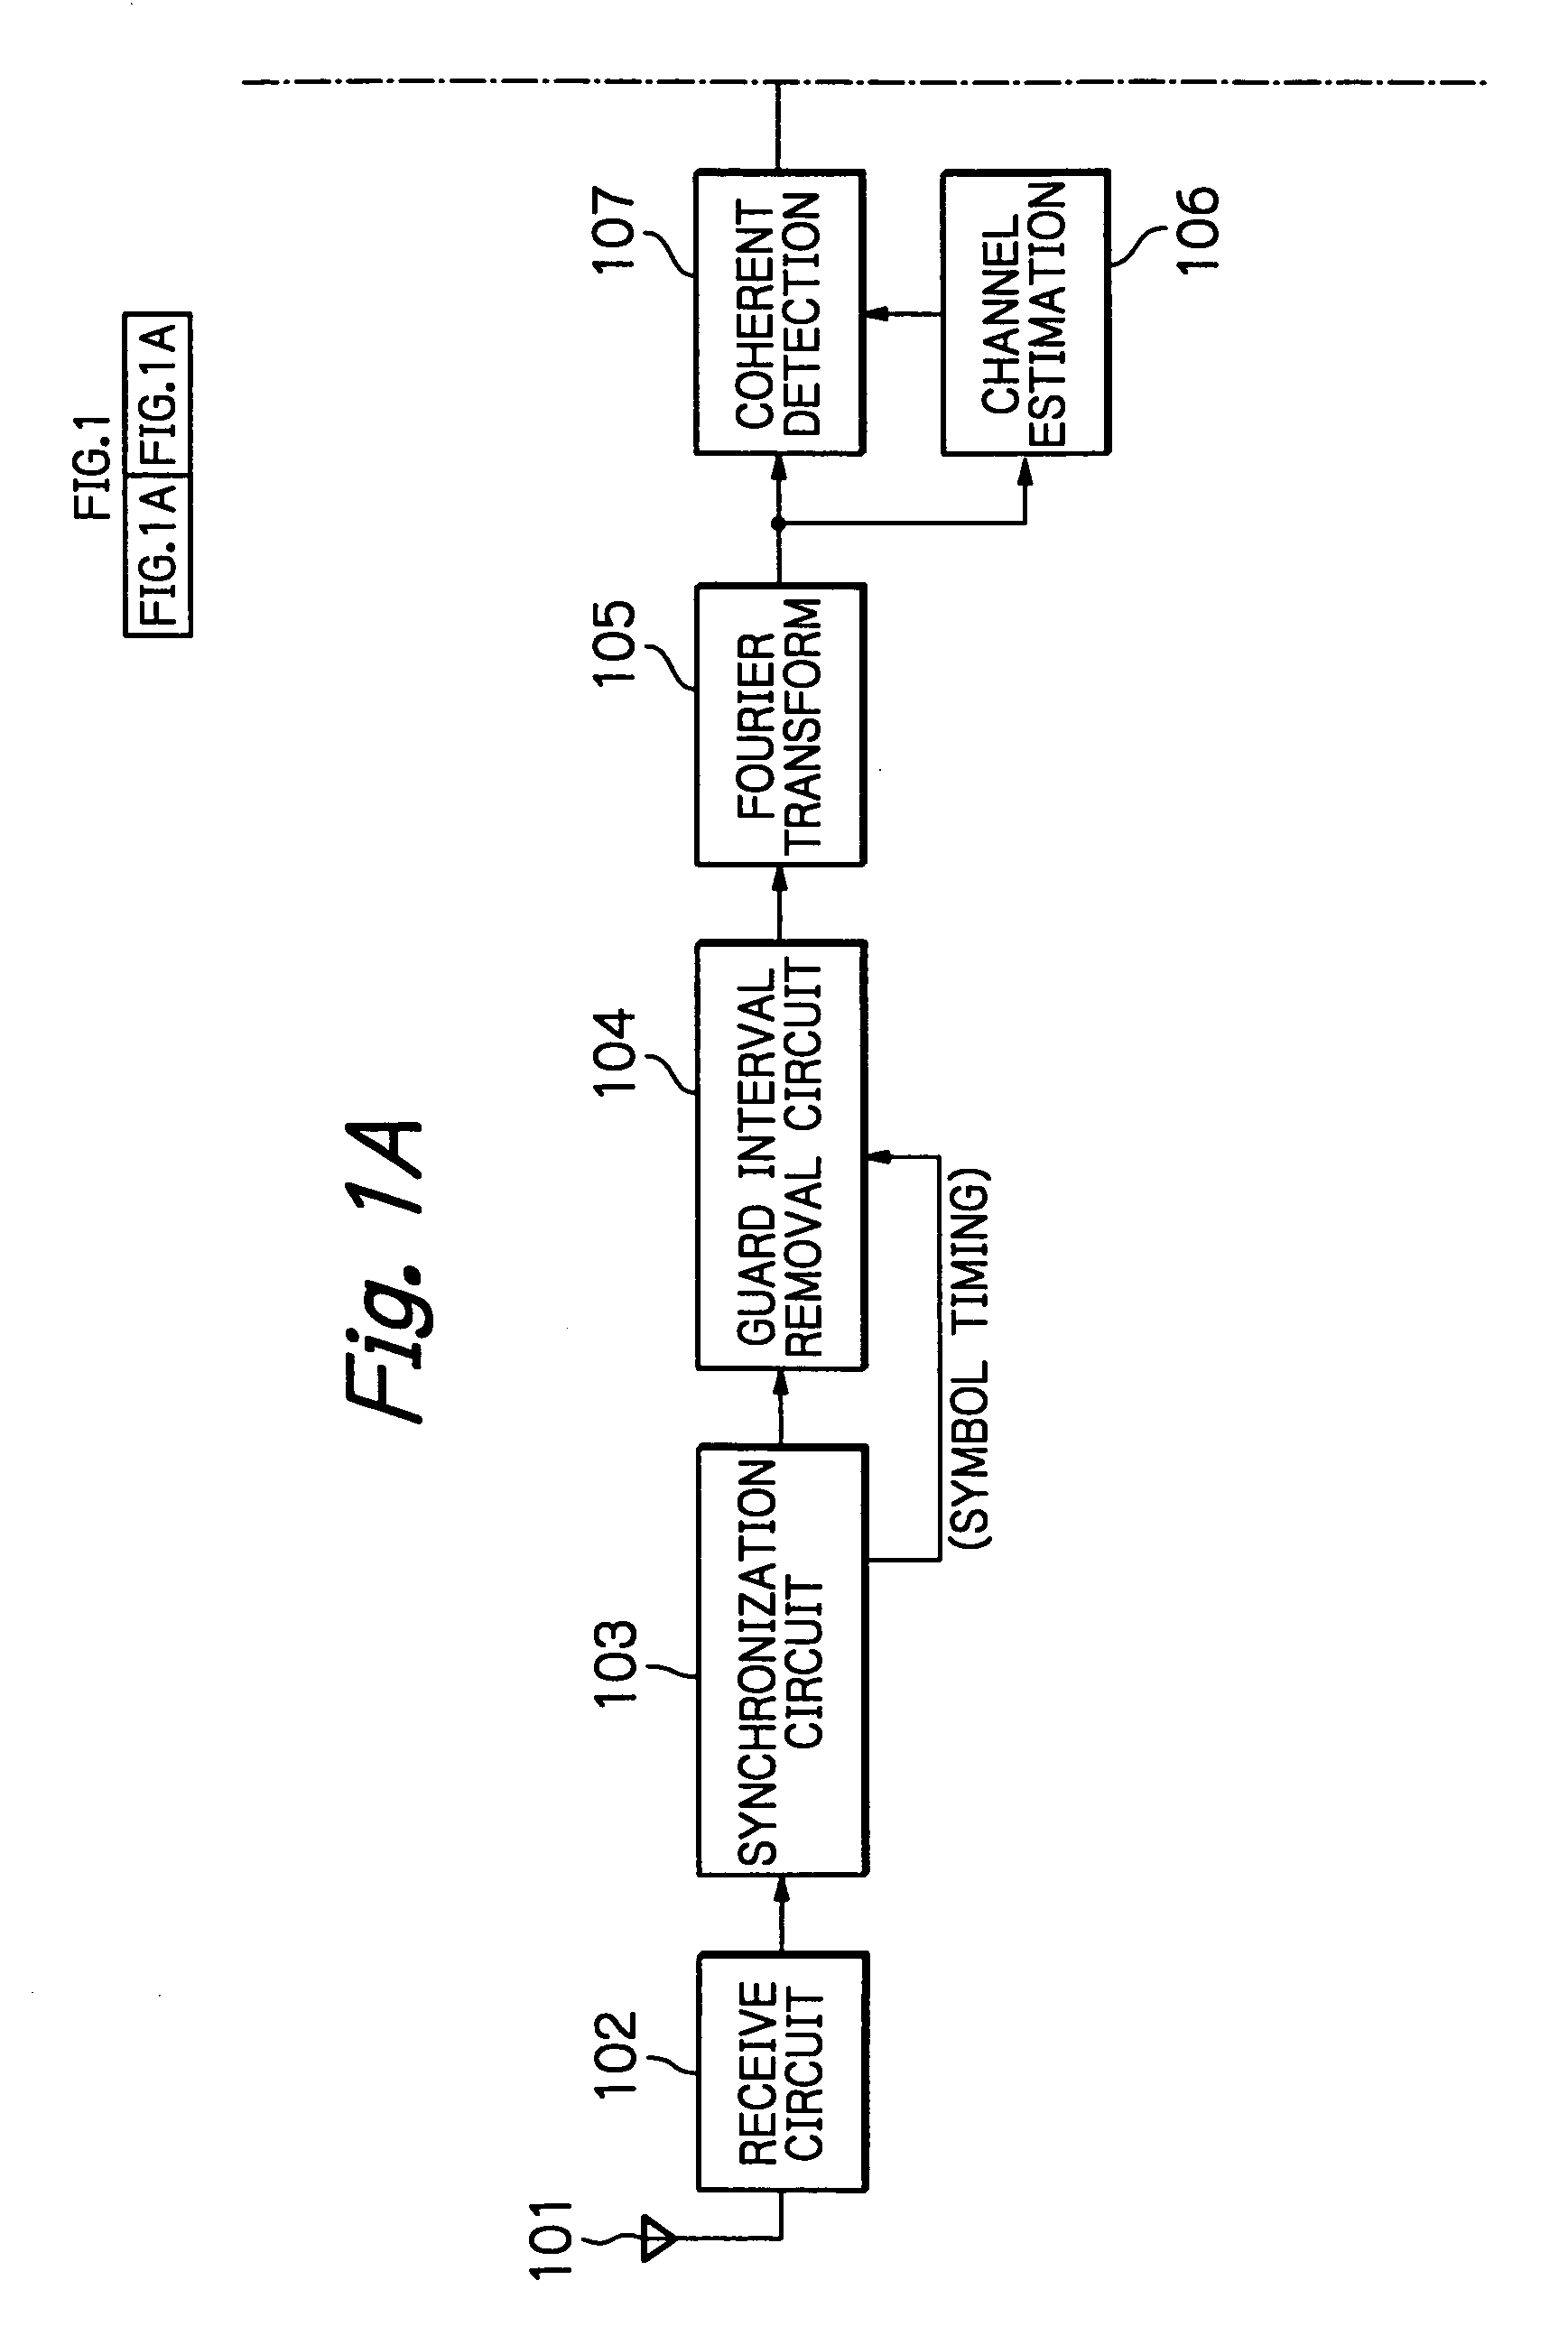 OFDM packet communication receiver